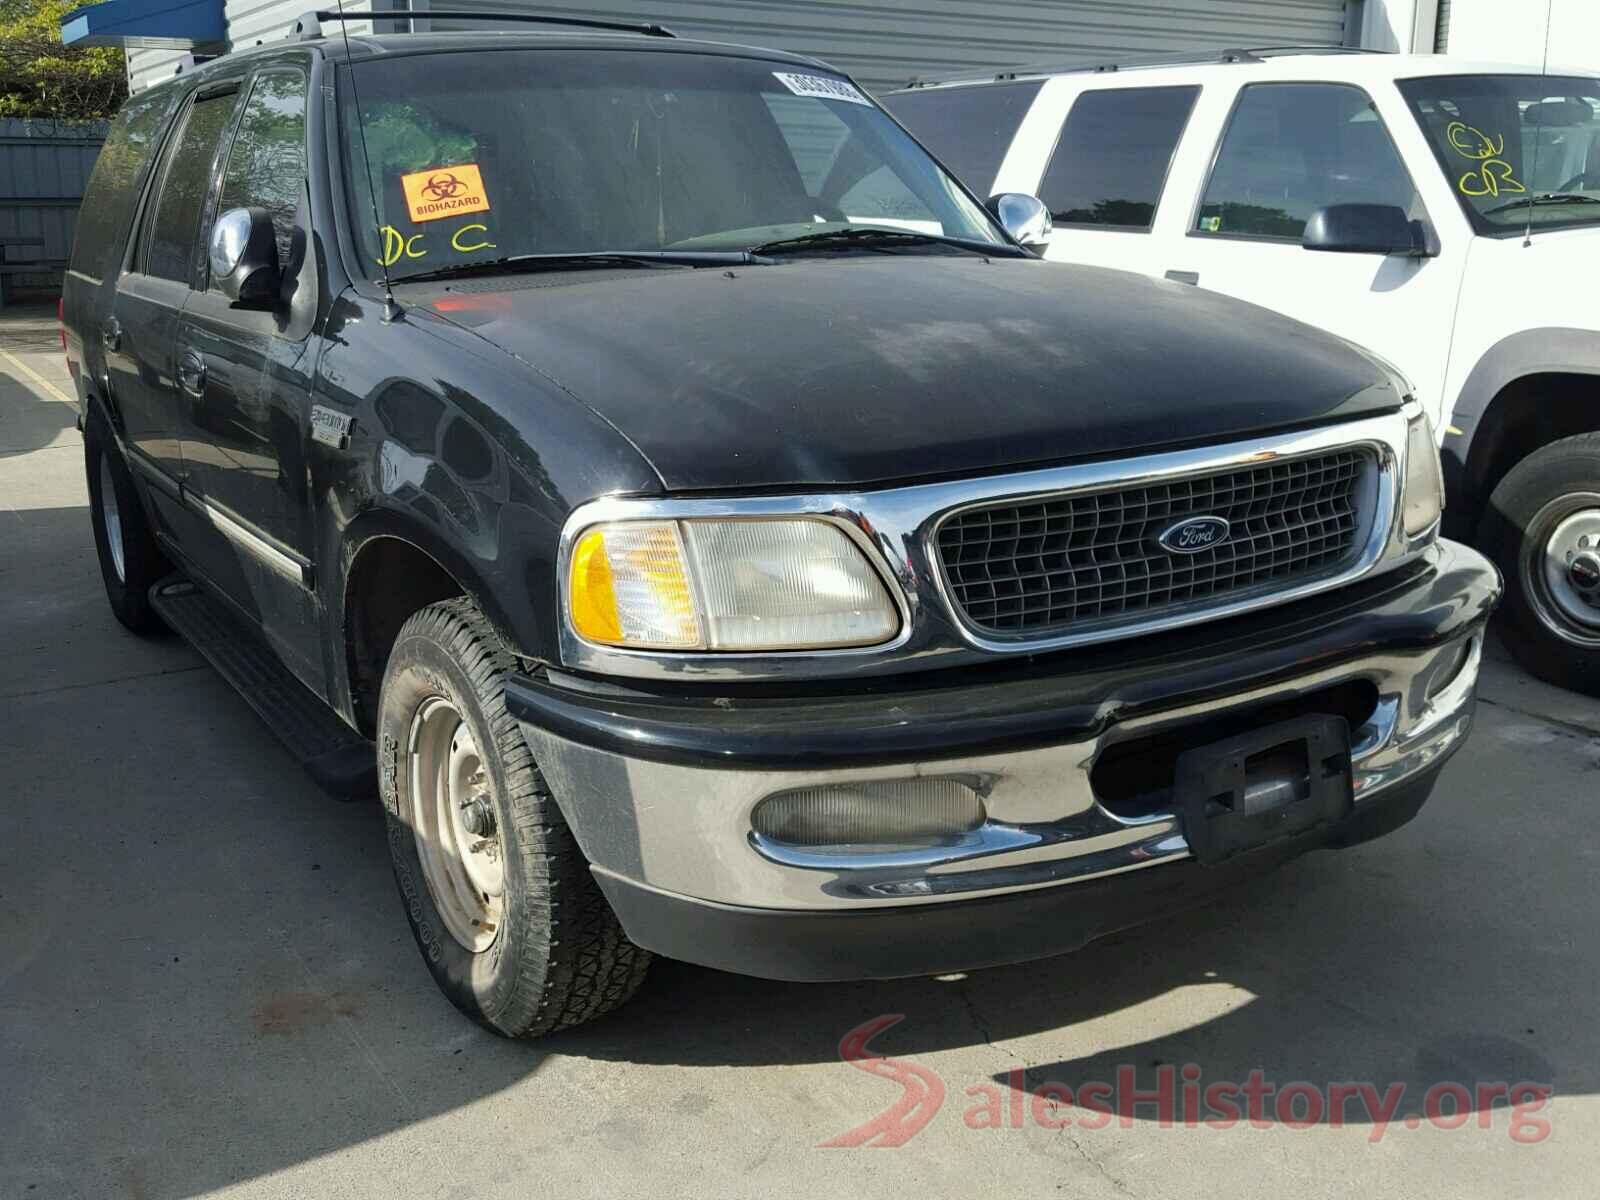 00000000007284050 1998 FORD EXPEDITION